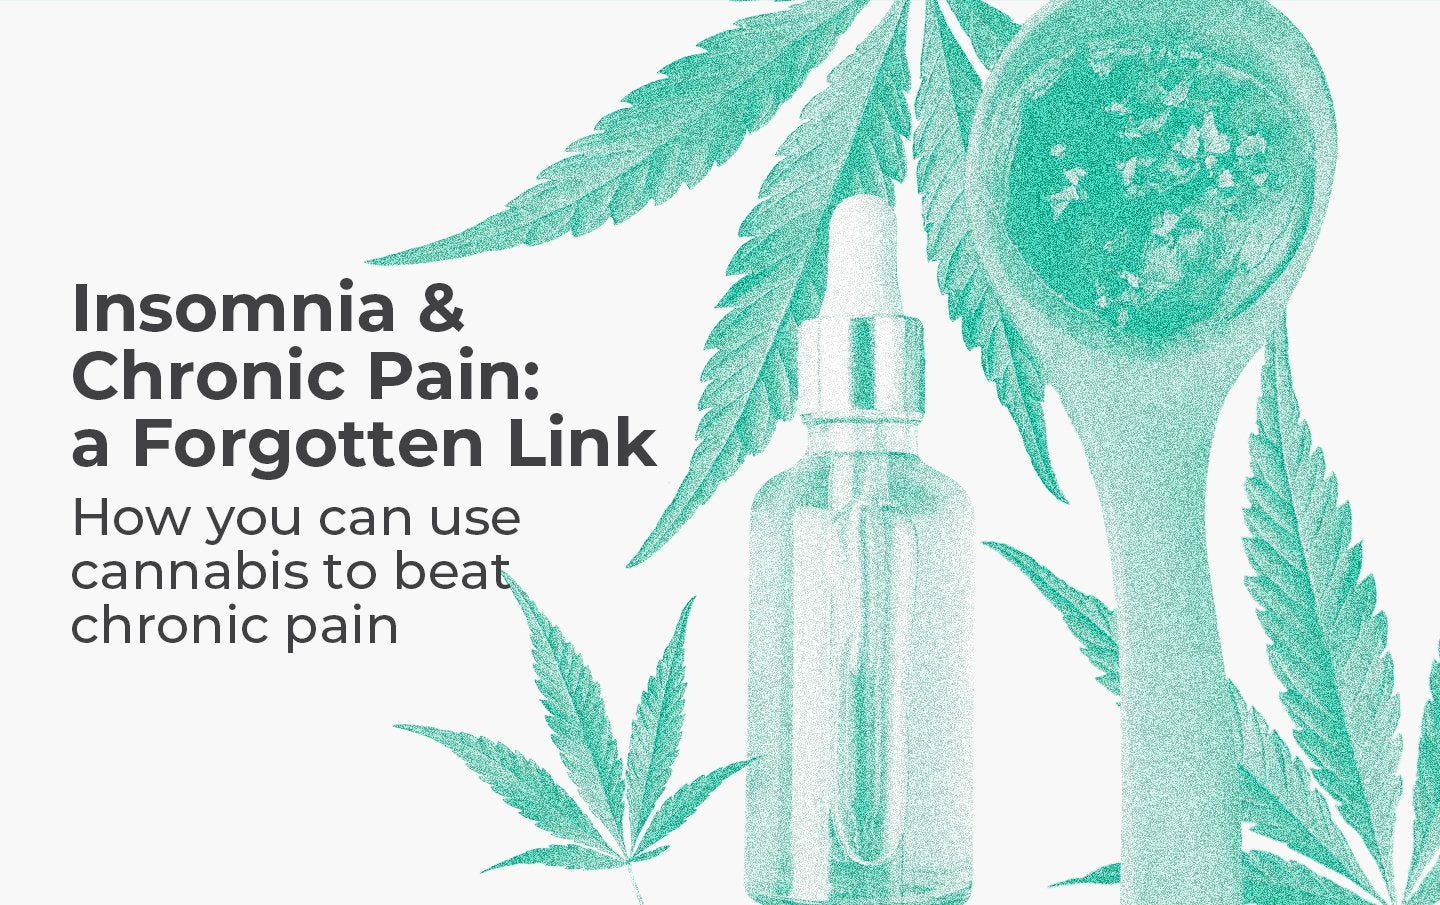 Webinar: Why Cannabis is Effective for Chronic Pain and Insomnia